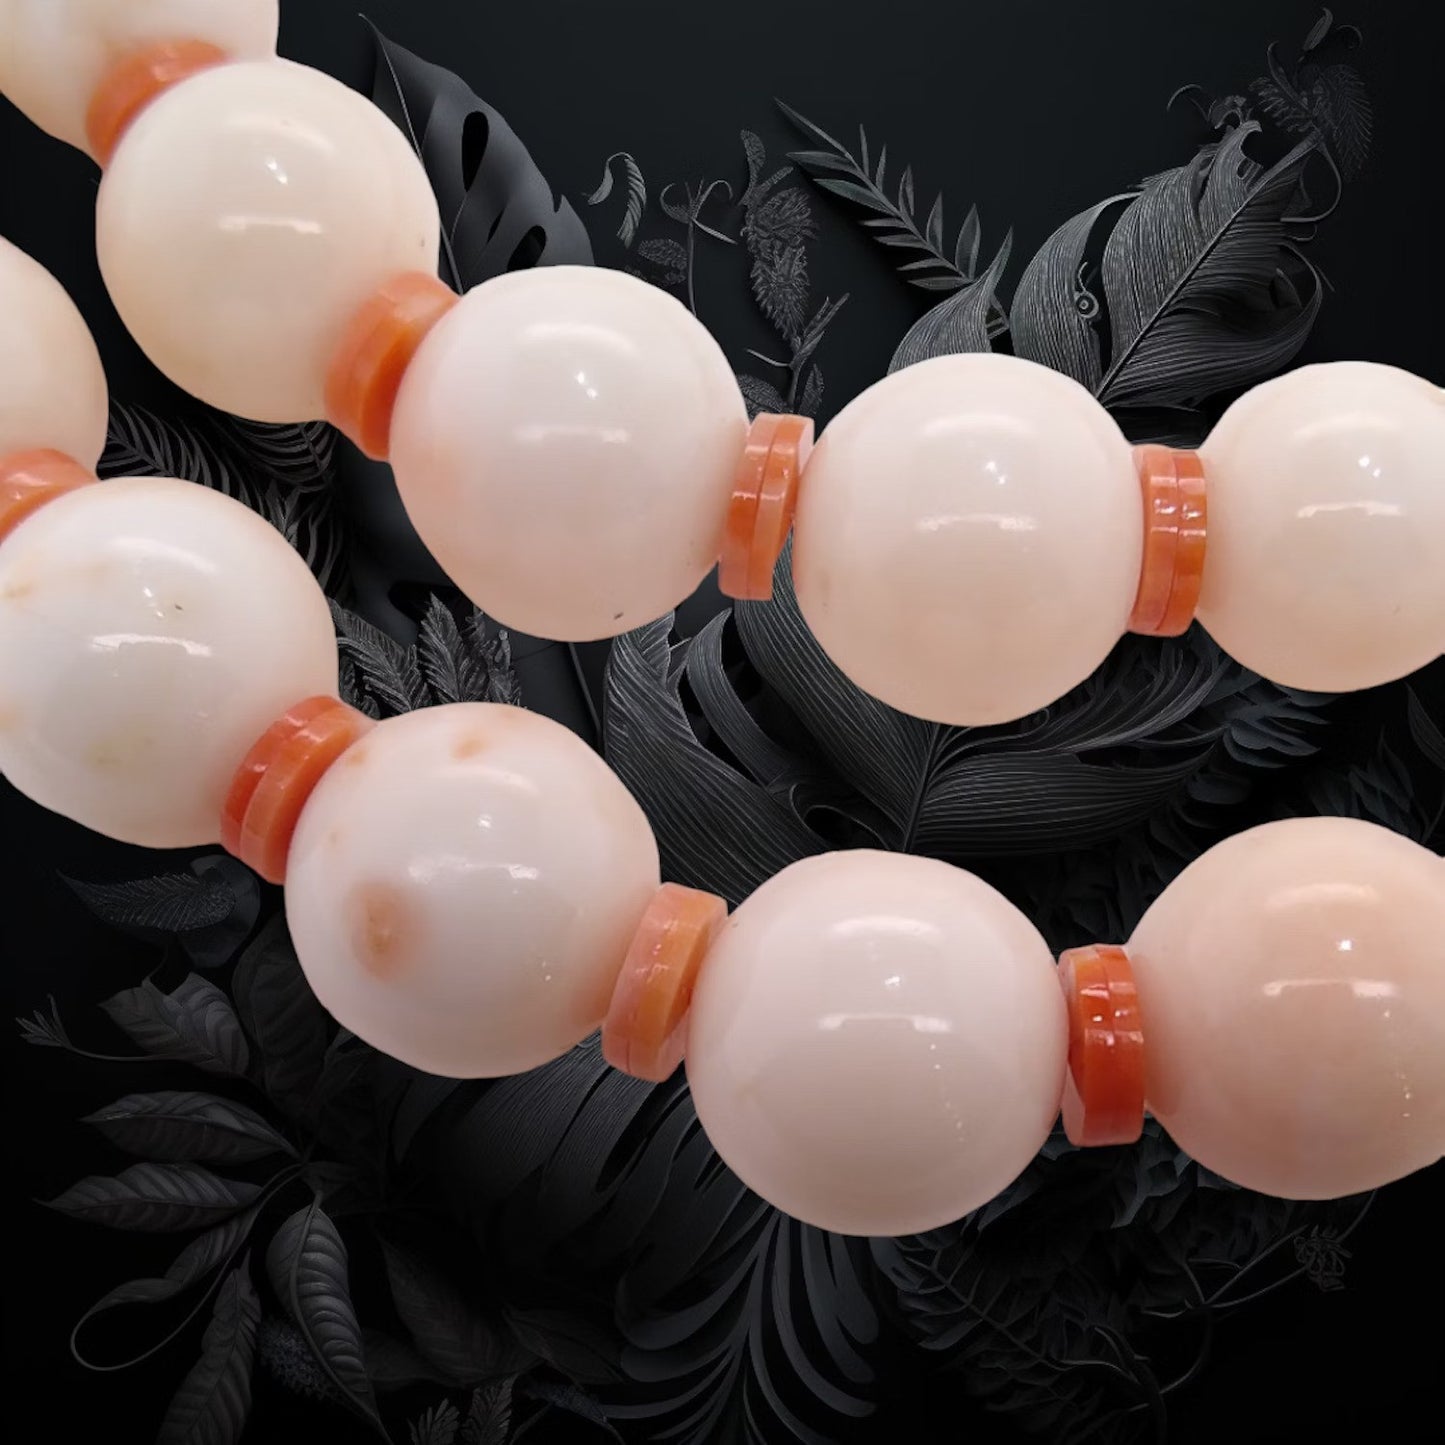 Deco Natural Peaches And Cream Coral Necklace